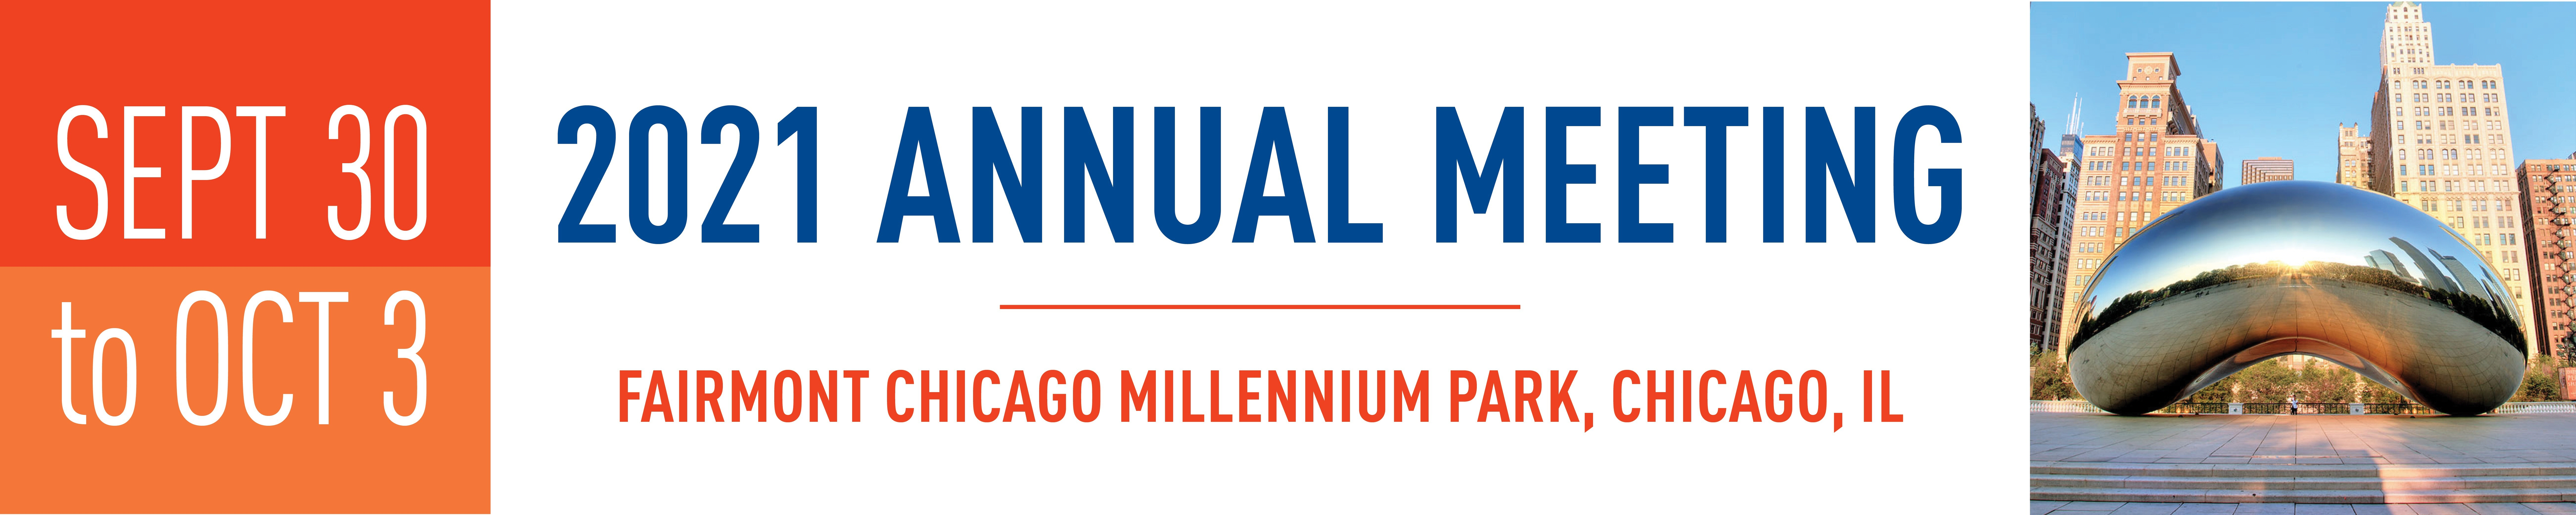 2021 Annual Meeting: Chicago